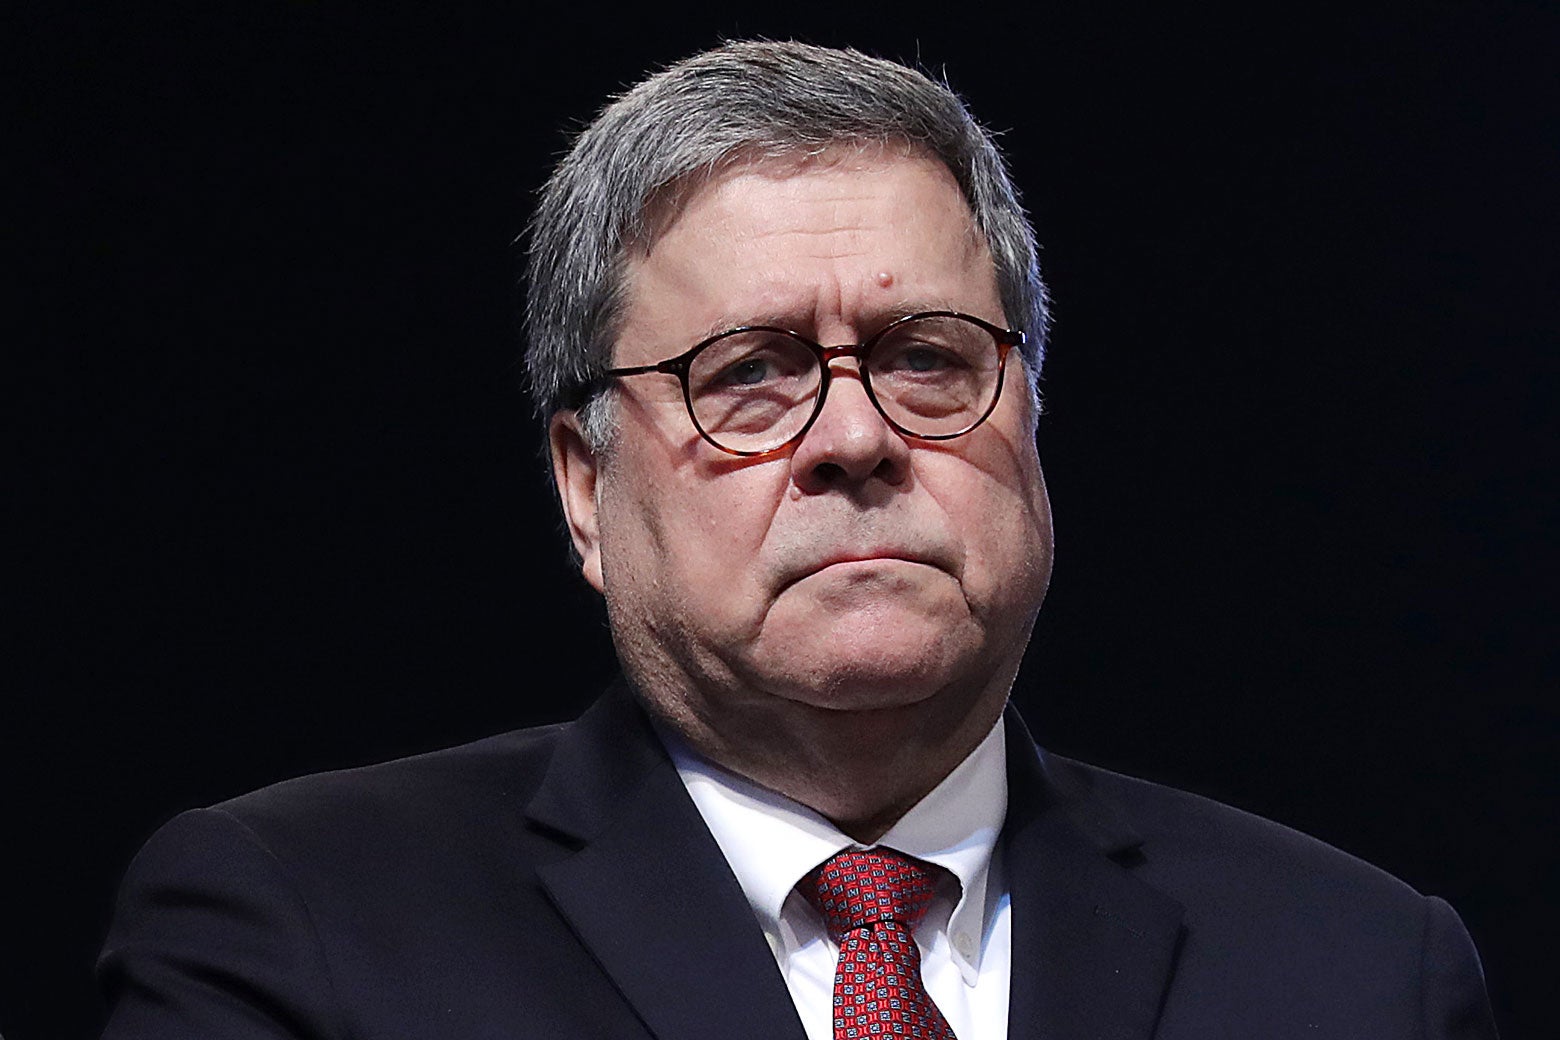 William Barr attends the National Police Week 31st Annual Candlelight Vigil on May 13 in Washington, D.C.